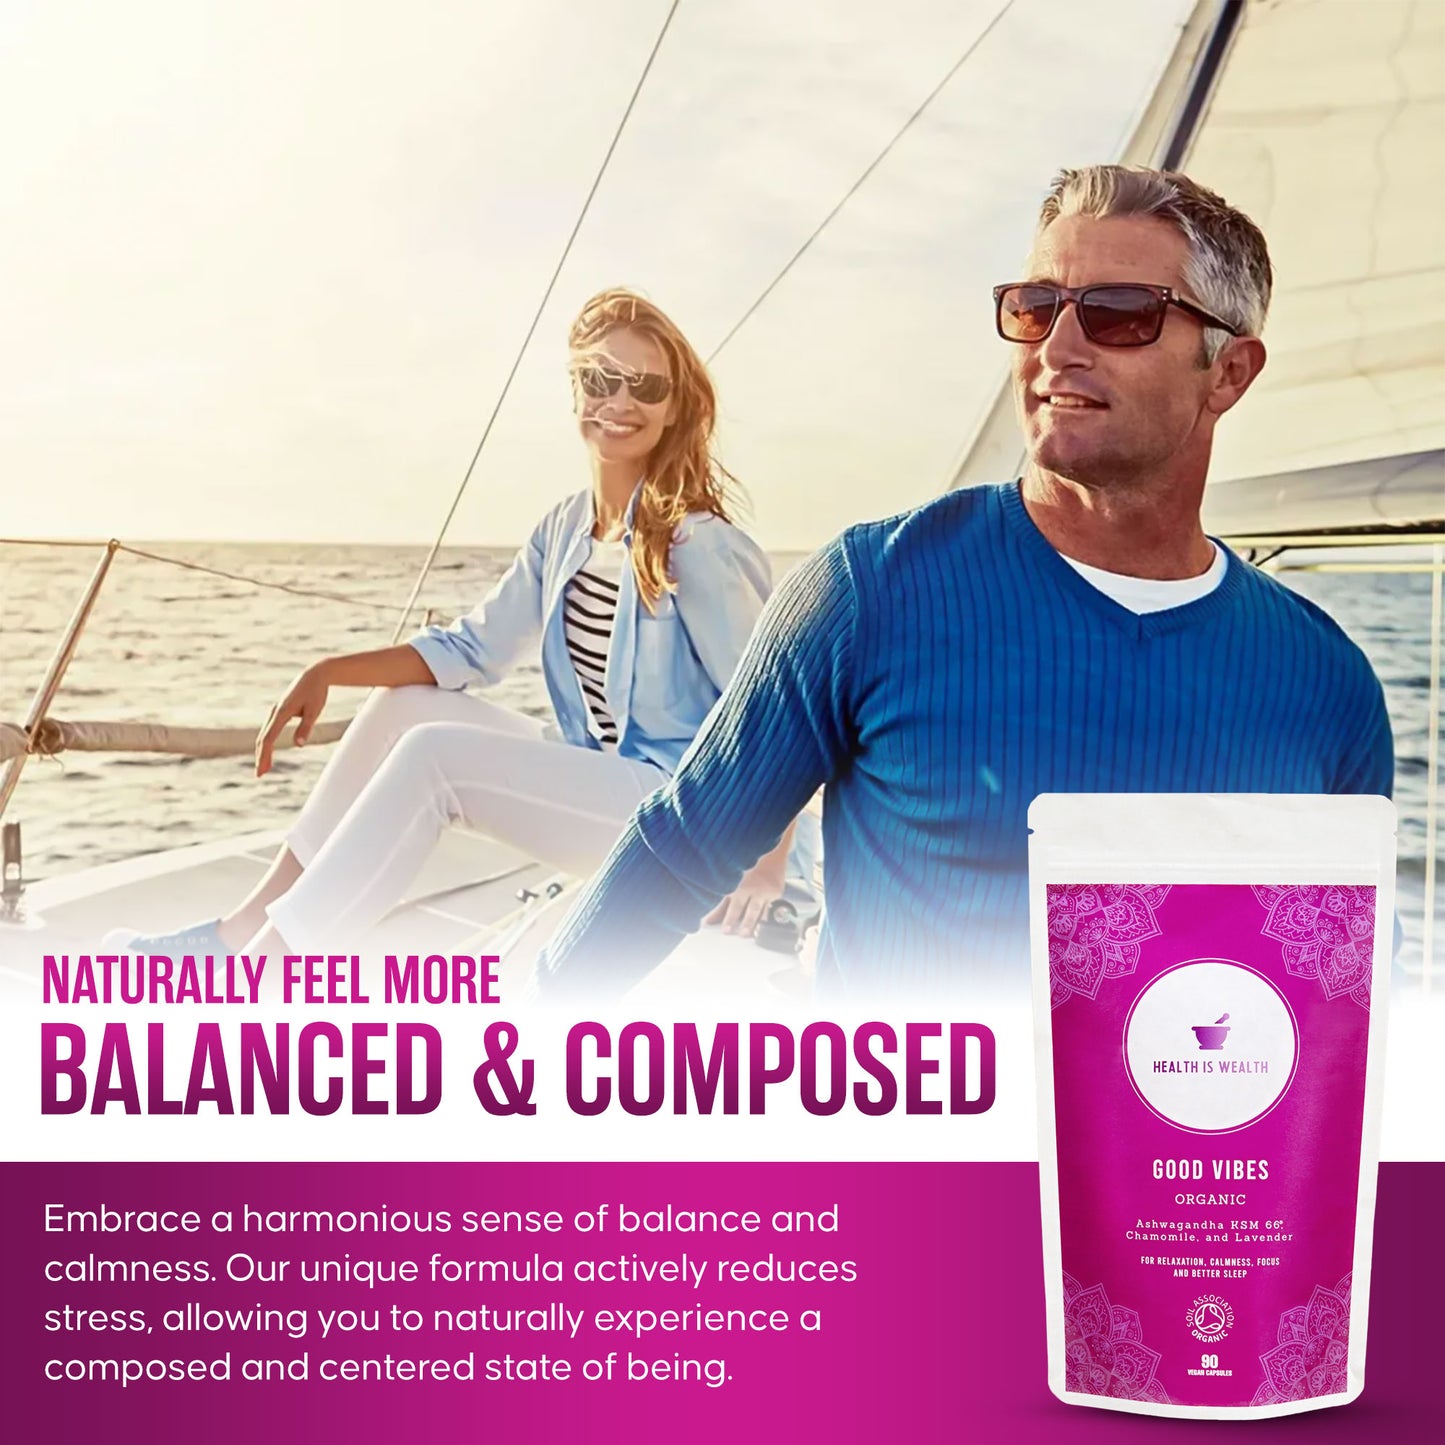 
                  
                    The image portrays a serene sailing scene with a caption "NATURALLY FEEL MORE BALANCED & COMPOSED", promoting the "Good Vibes - Natural Stress Relief Supplement". It emphasizes the supplement's role in fostering balance and reducing stress, enhancing a composed lifestyle.
                  
                